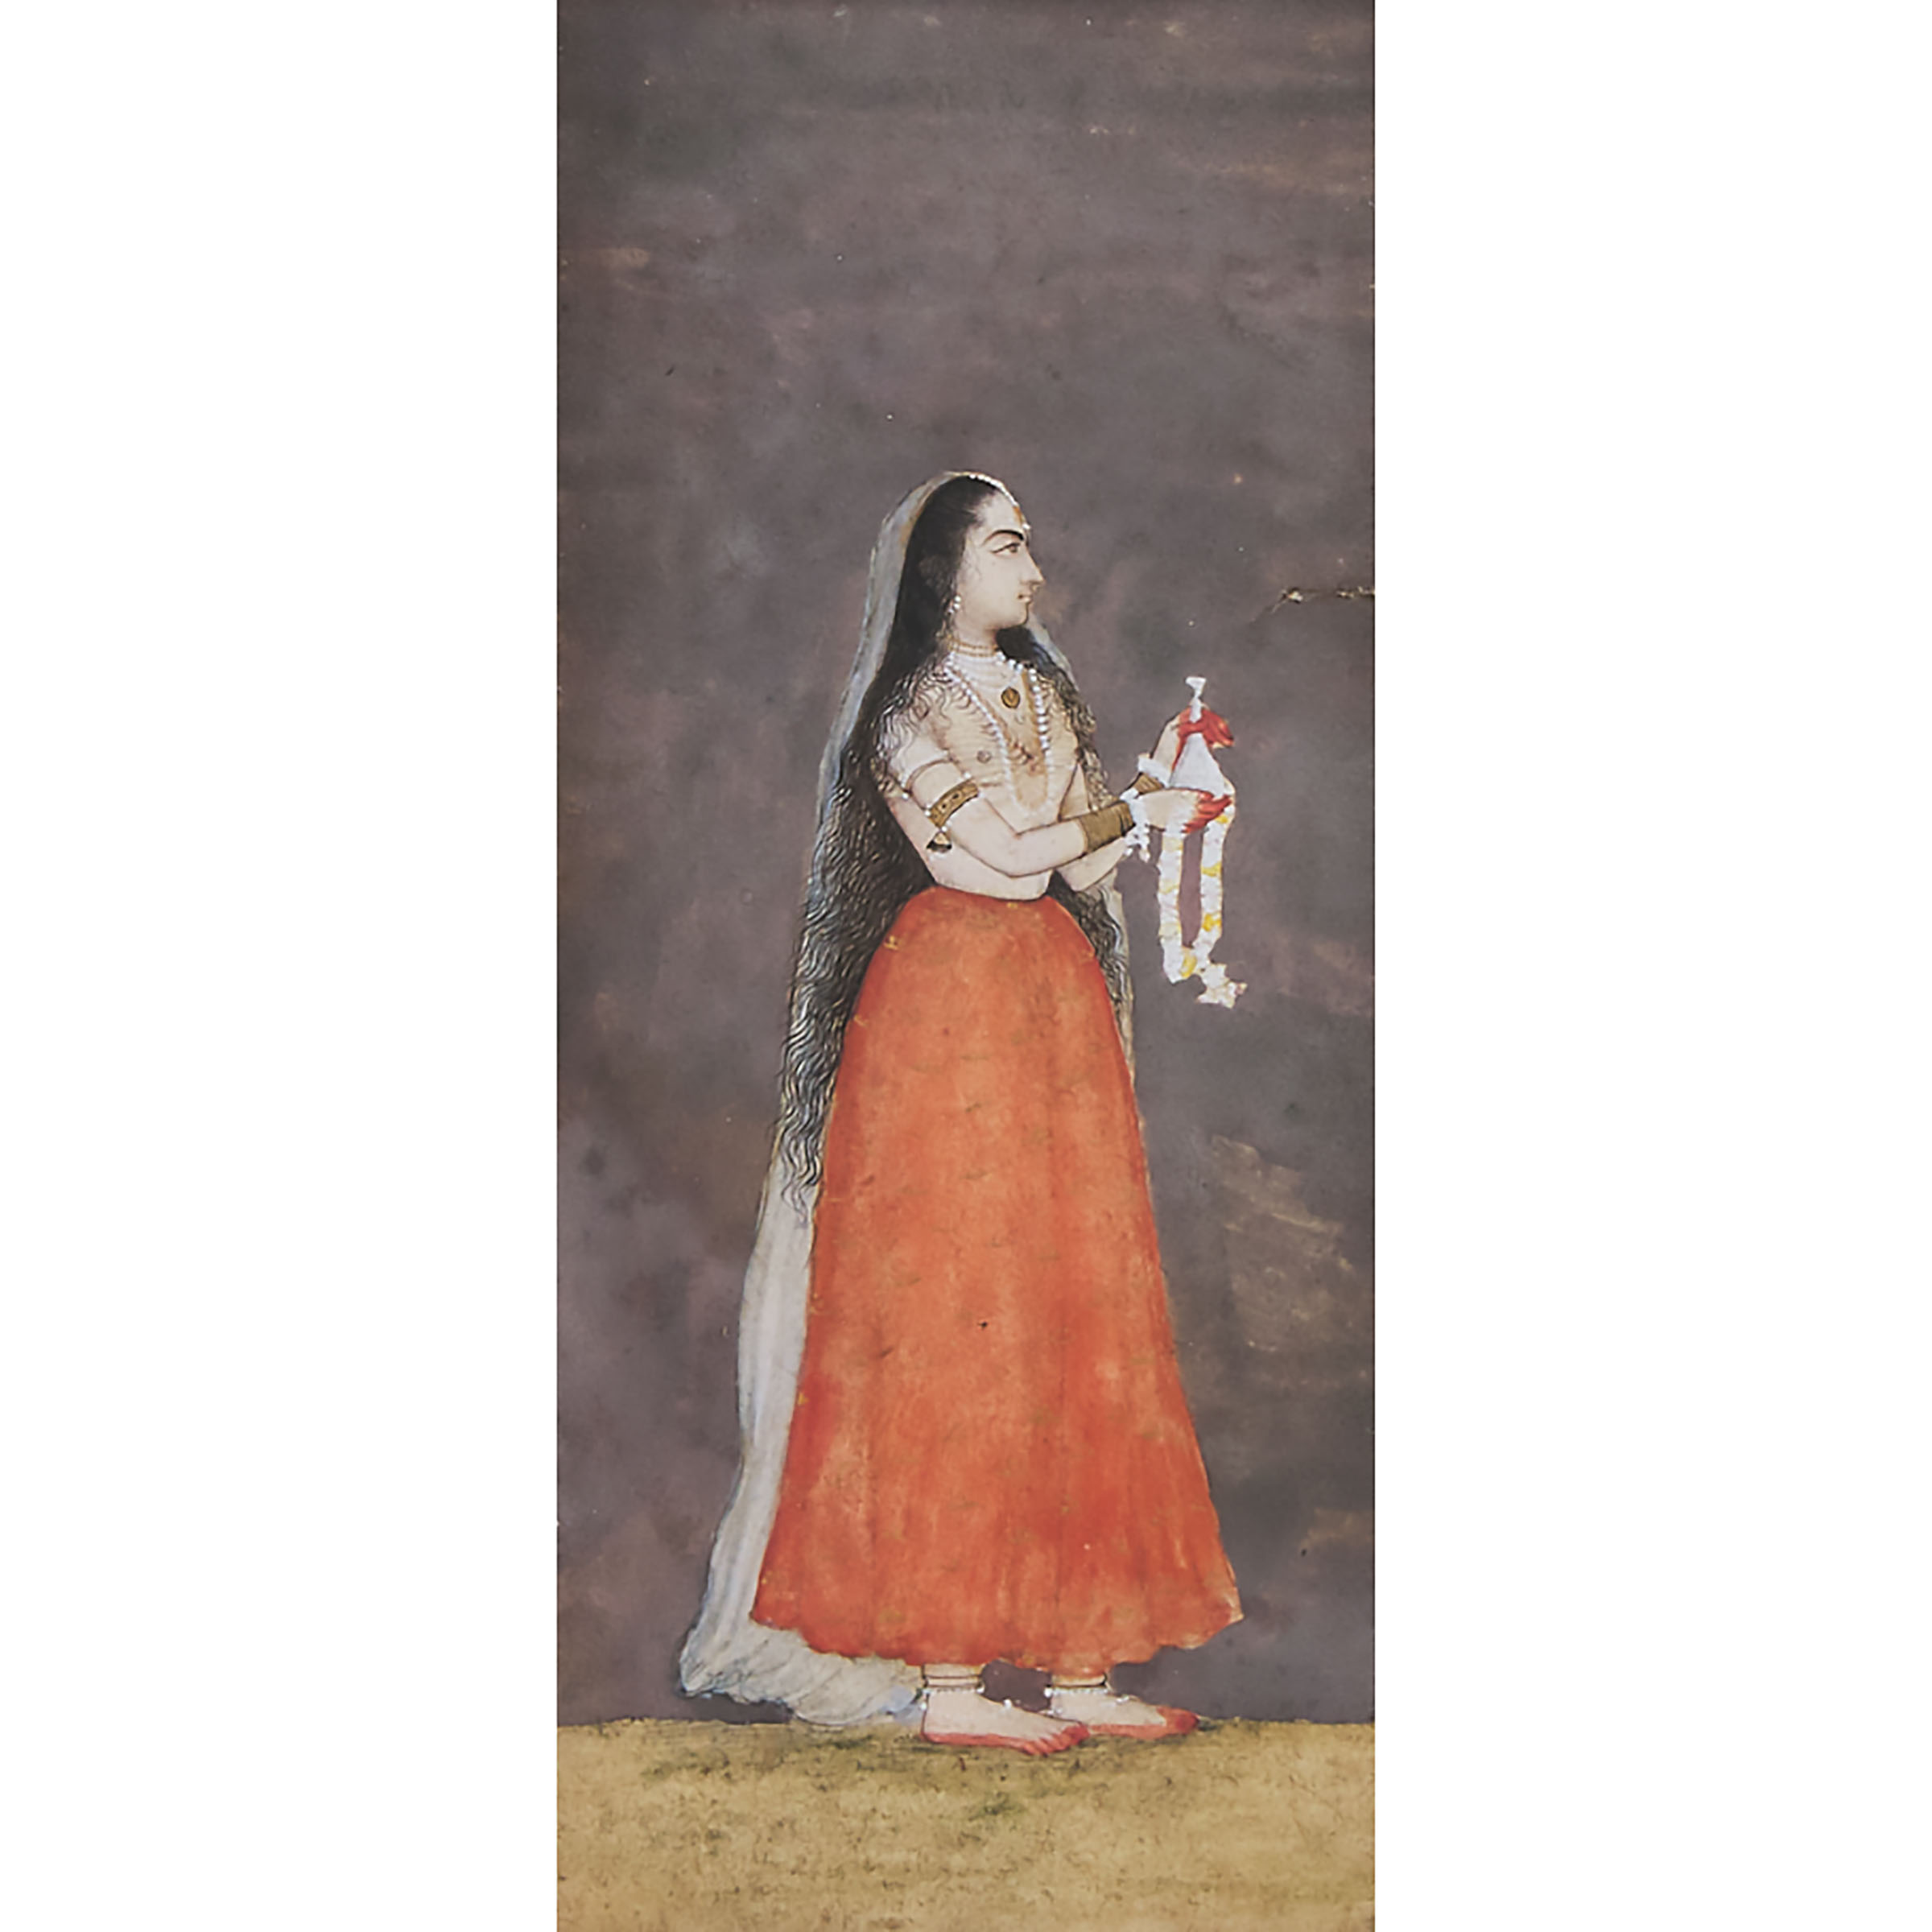 Mughal School, A Court Lady Holding a Vessel and Garland, 18th Century